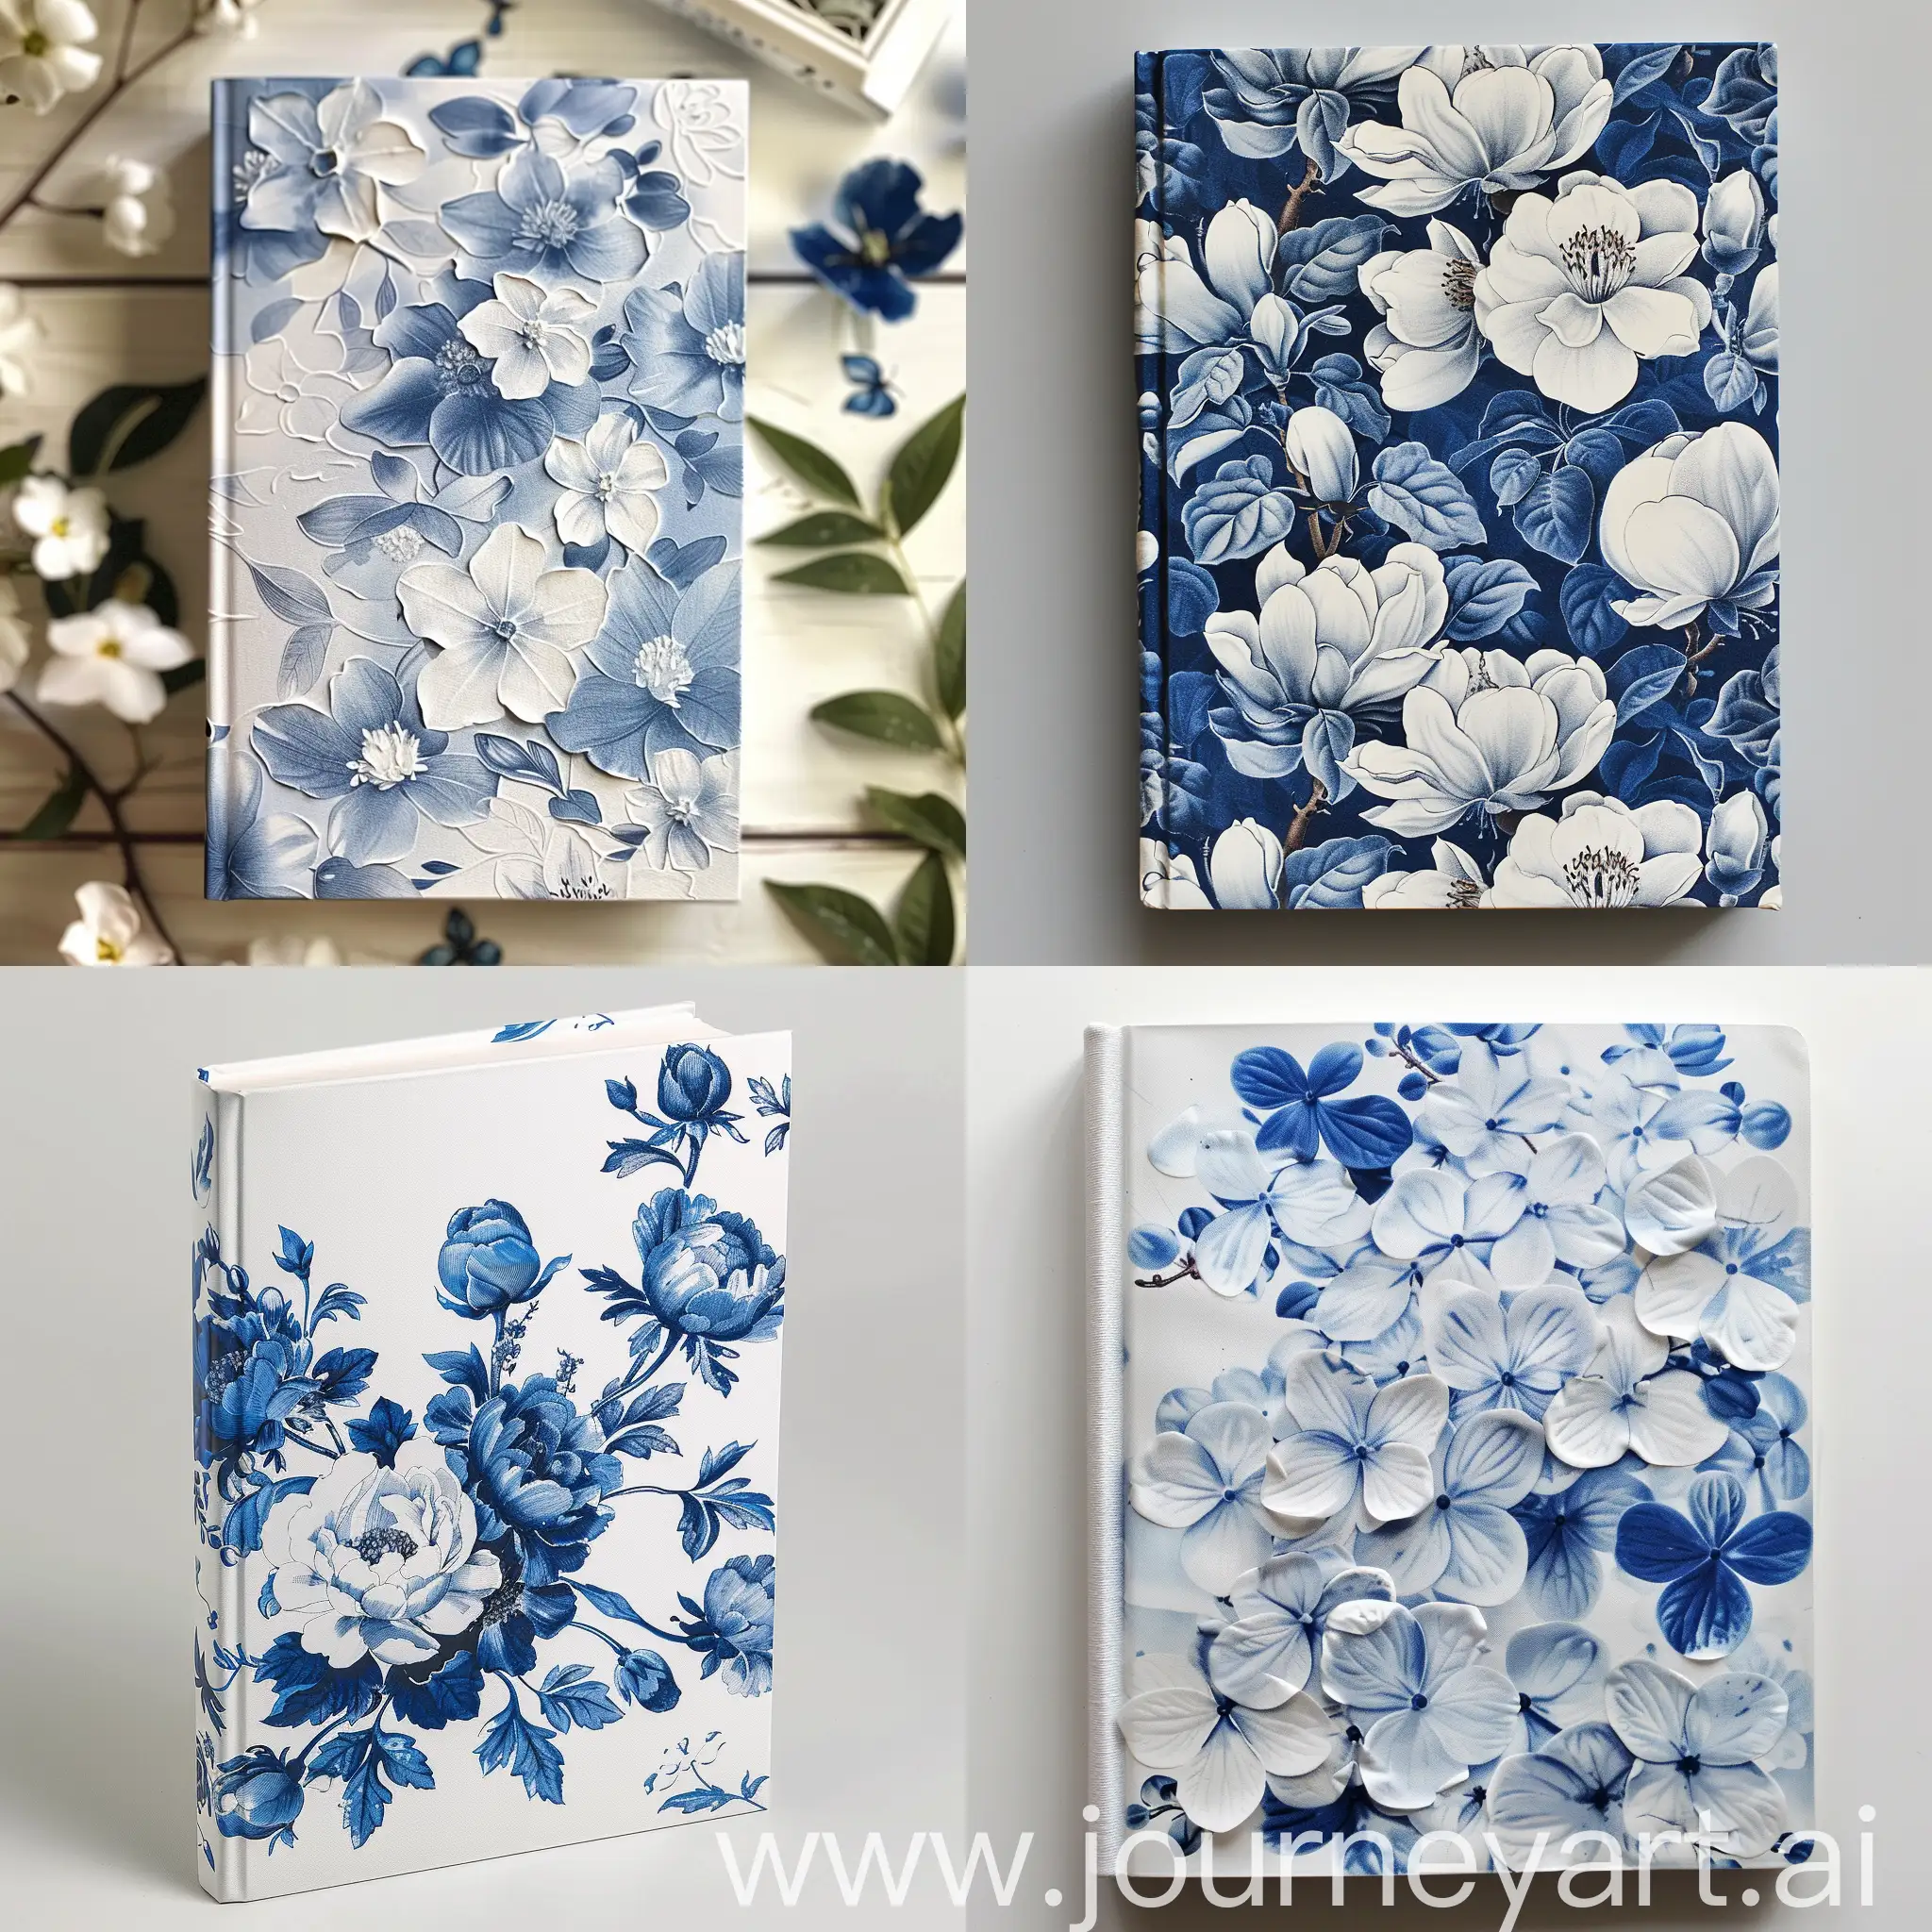 Book cover using white and blue flowers 
